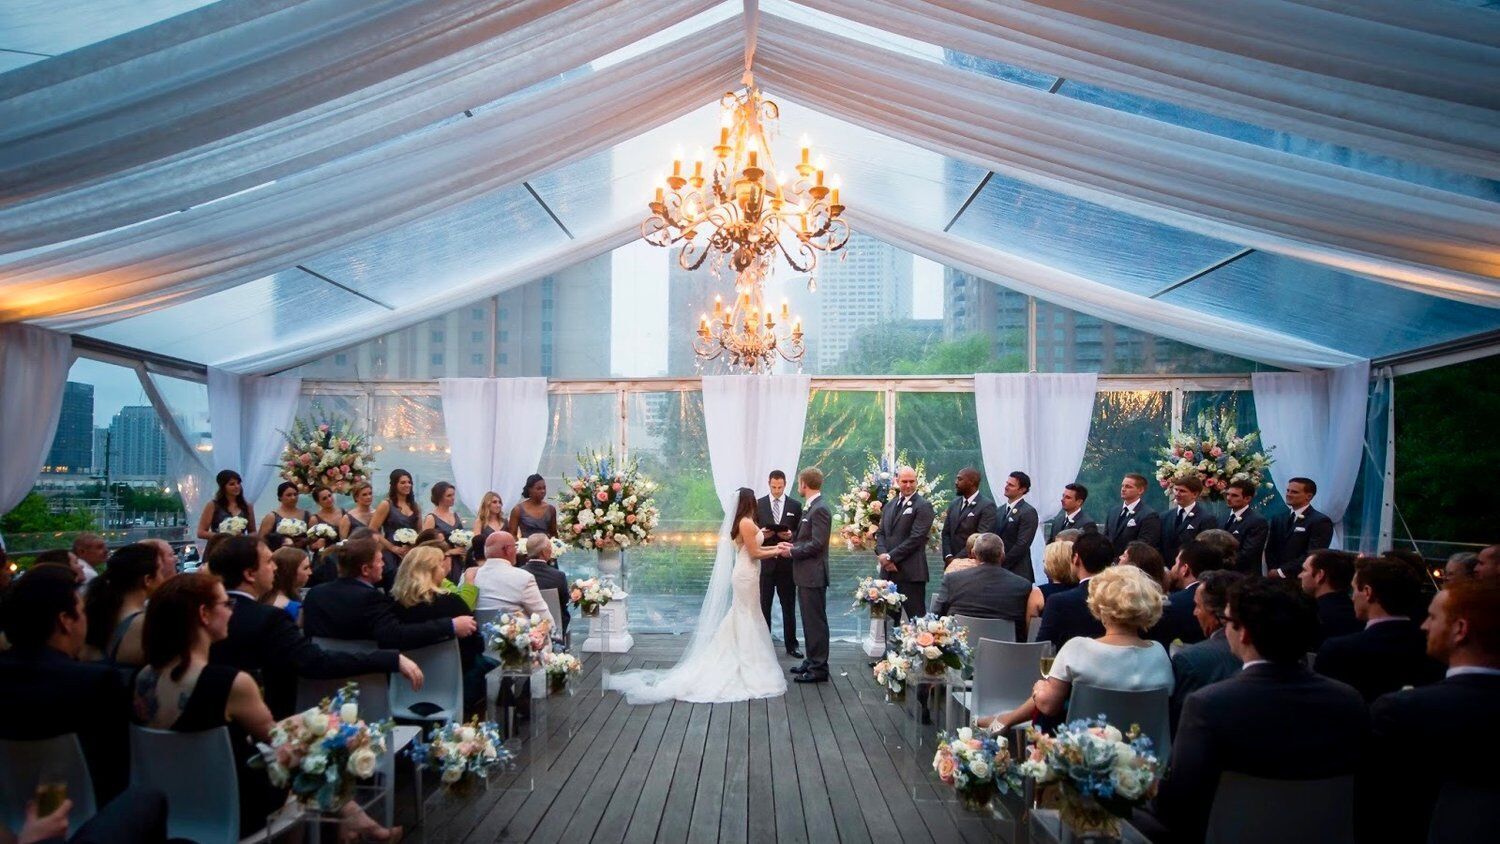 small outdoor wedding venues in houston